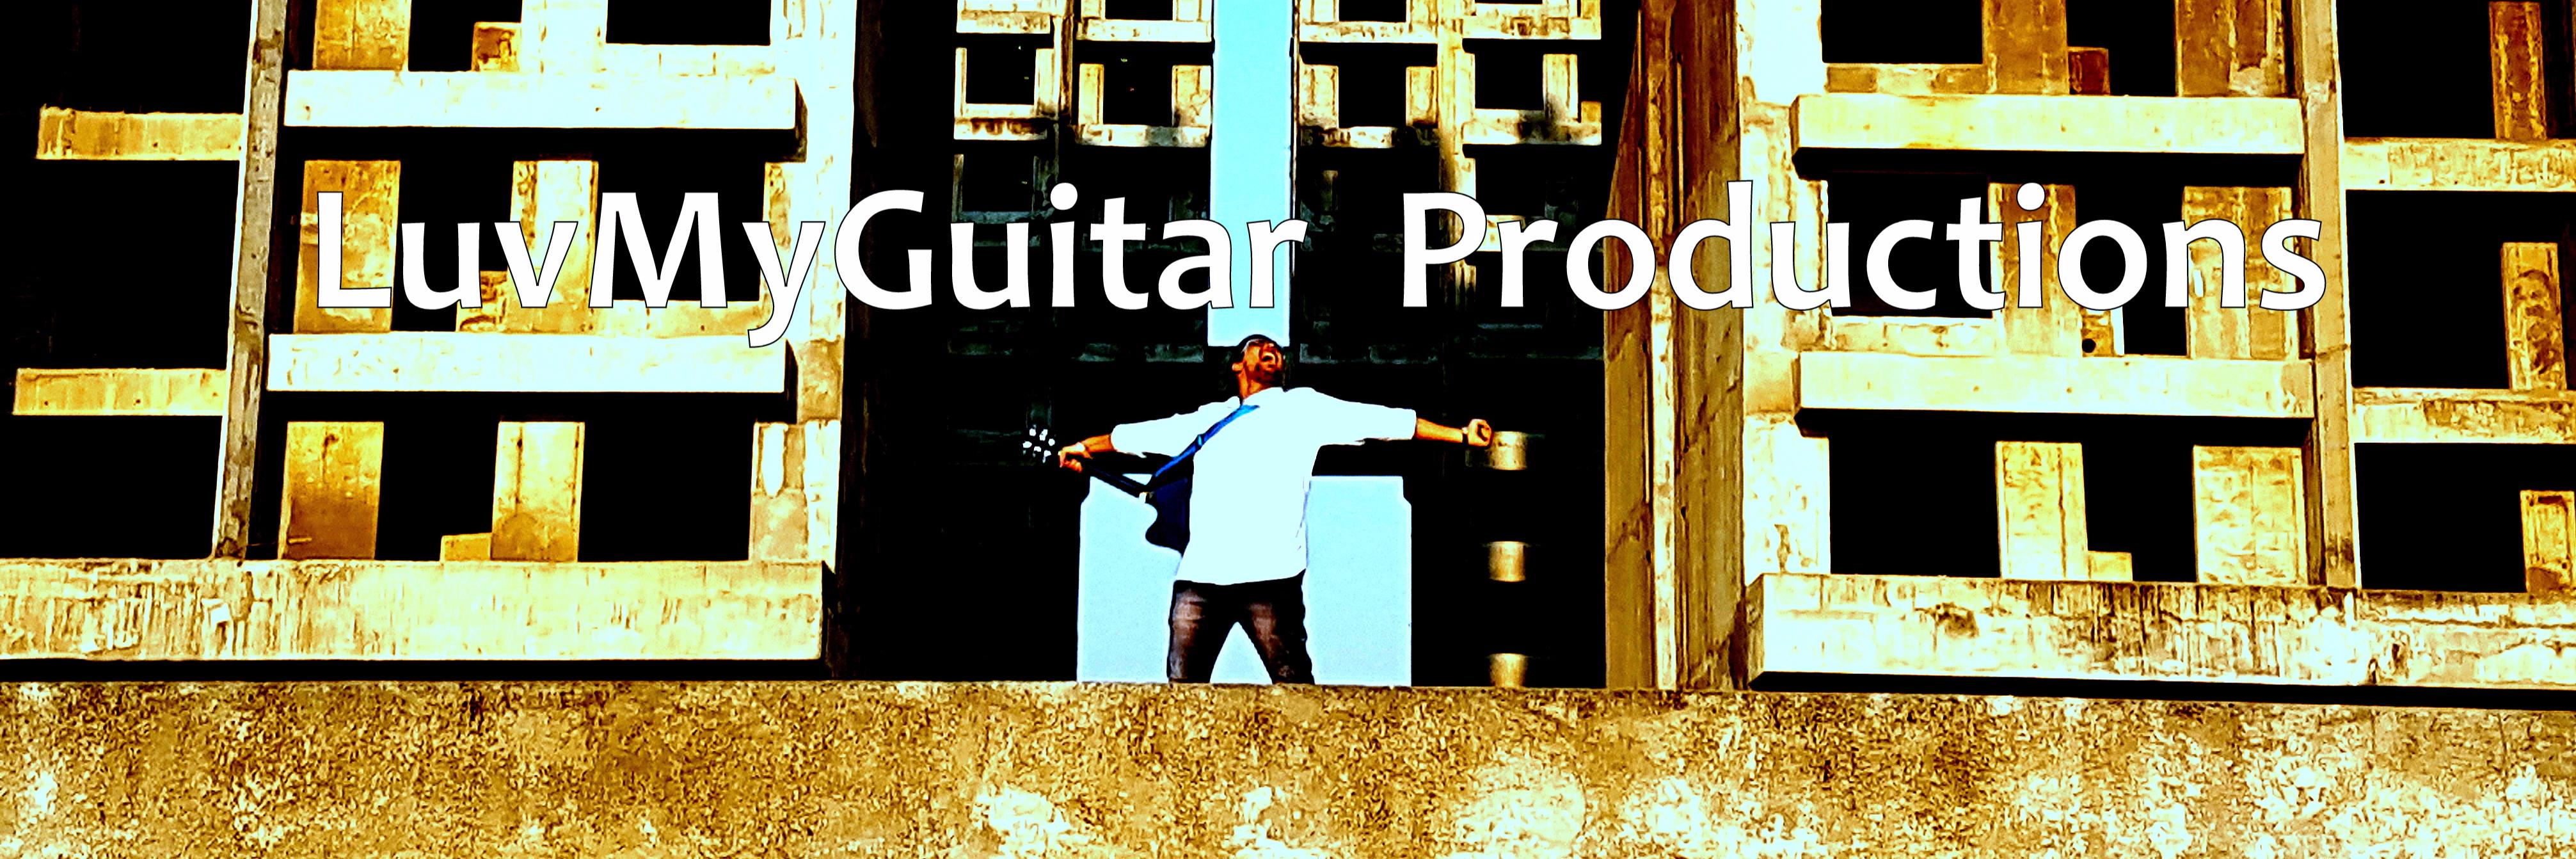 LuvMyguitar Productions